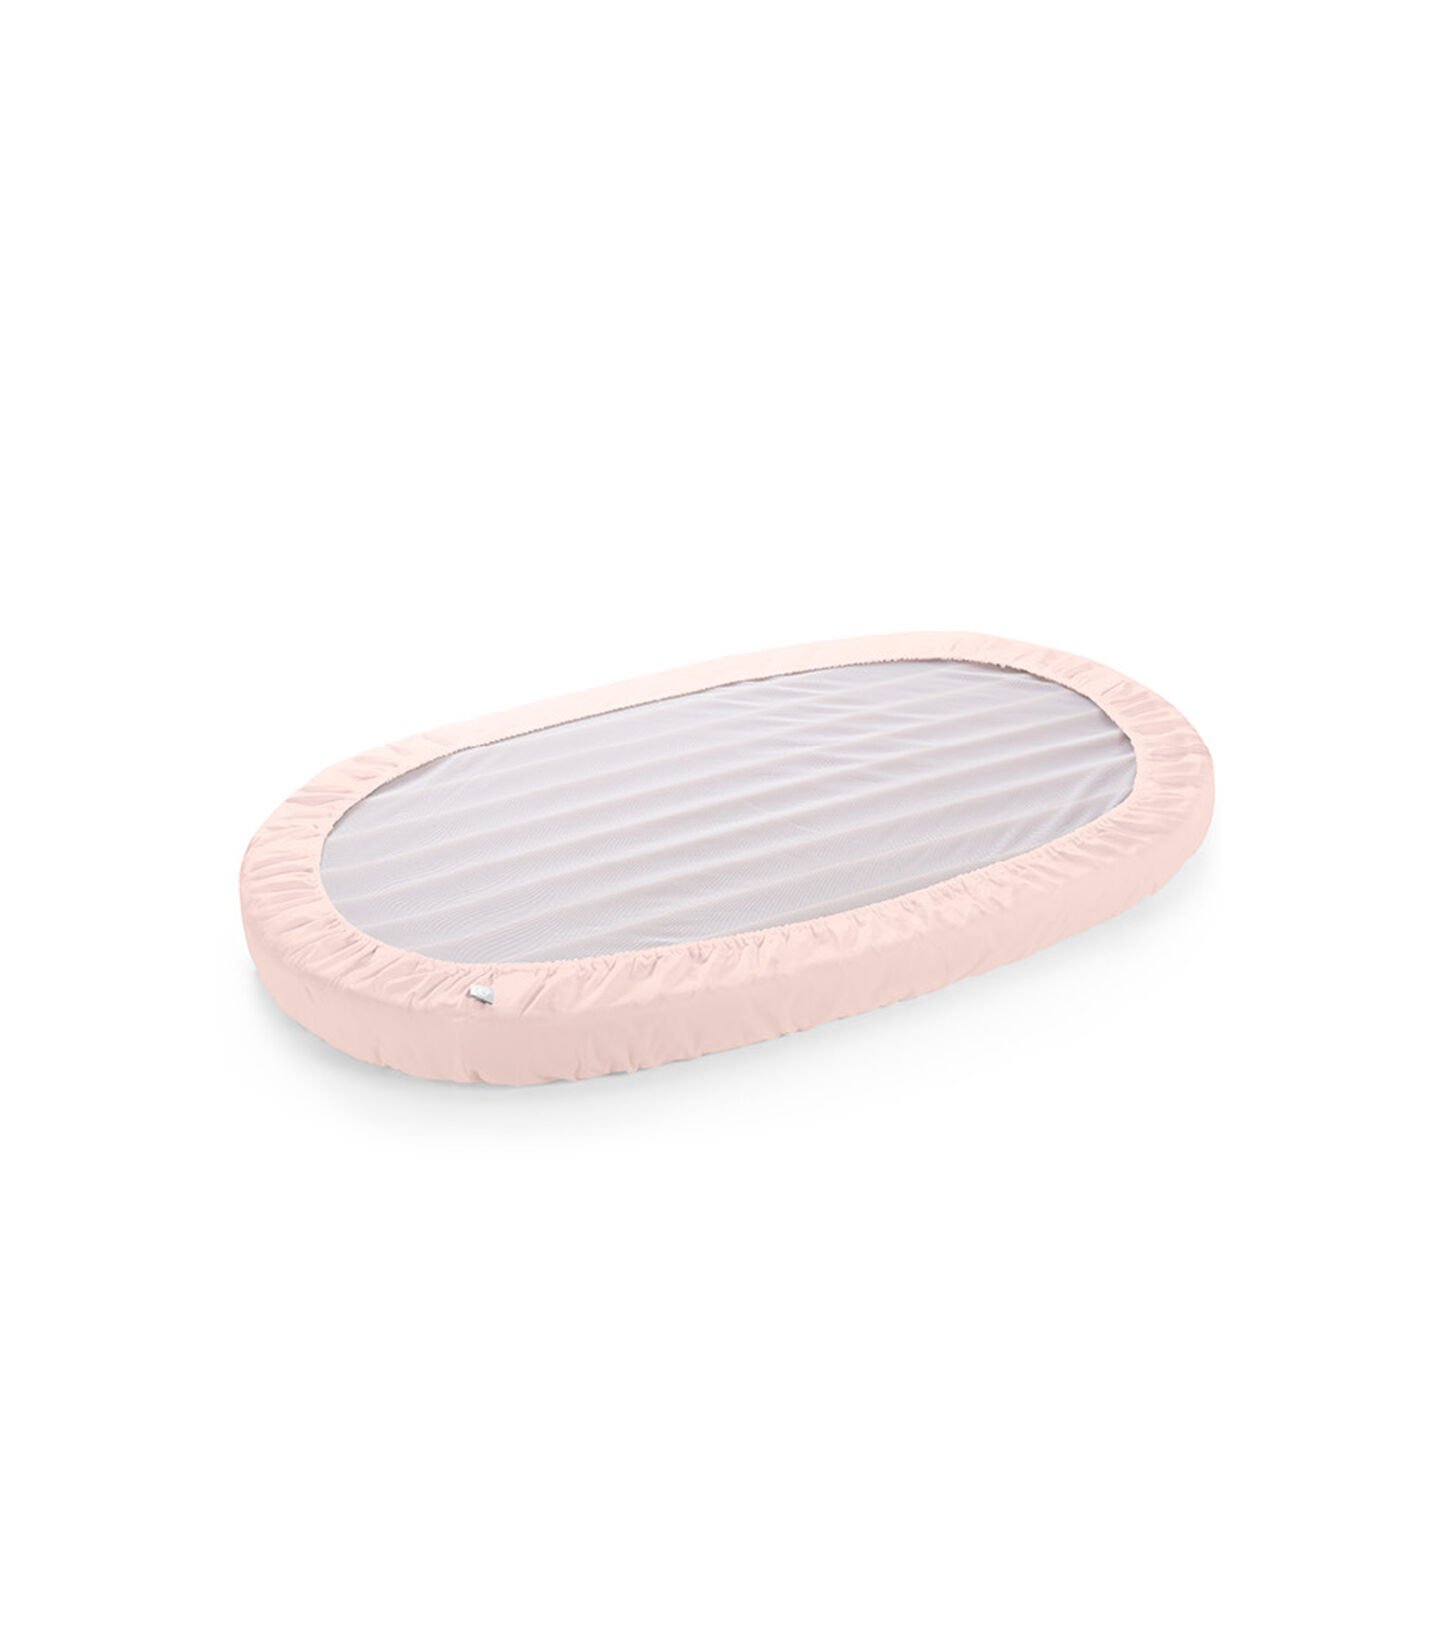 Stokke® Sleepi™ Fitted Sheet Pink, Rose pêche, mainview view 3